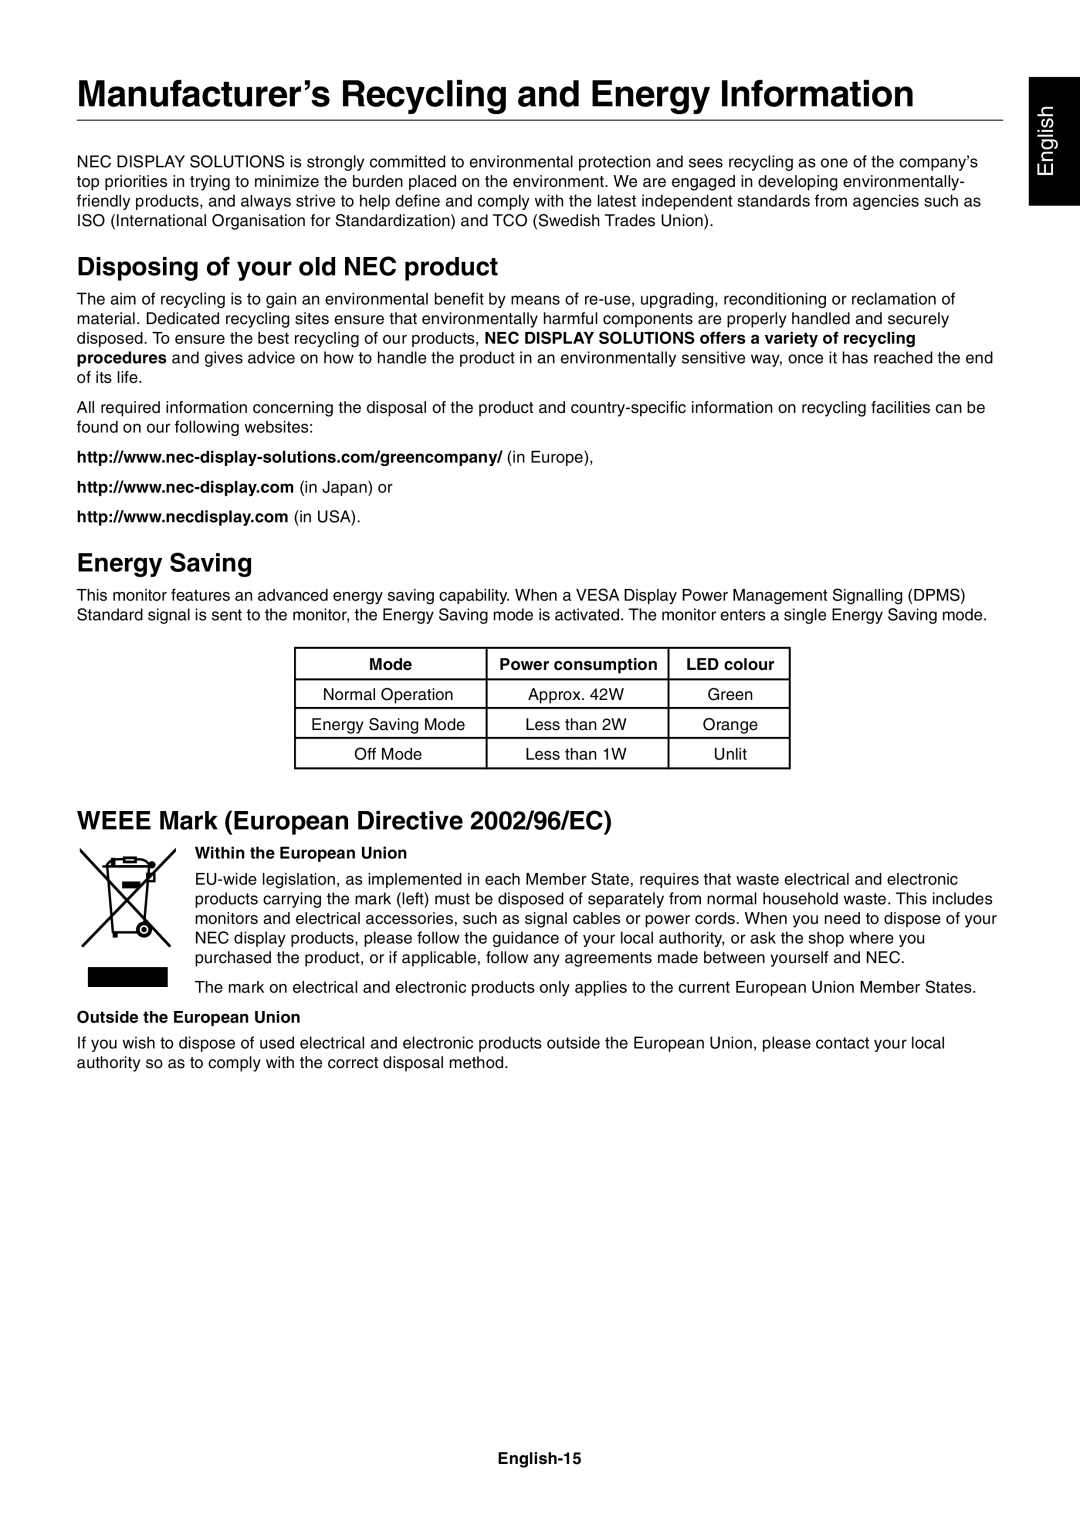 NEC LCD1970NX ManufacturerÕs Recycling and Energy Information, Disposing of your old NEC product, Energy Saving, English 